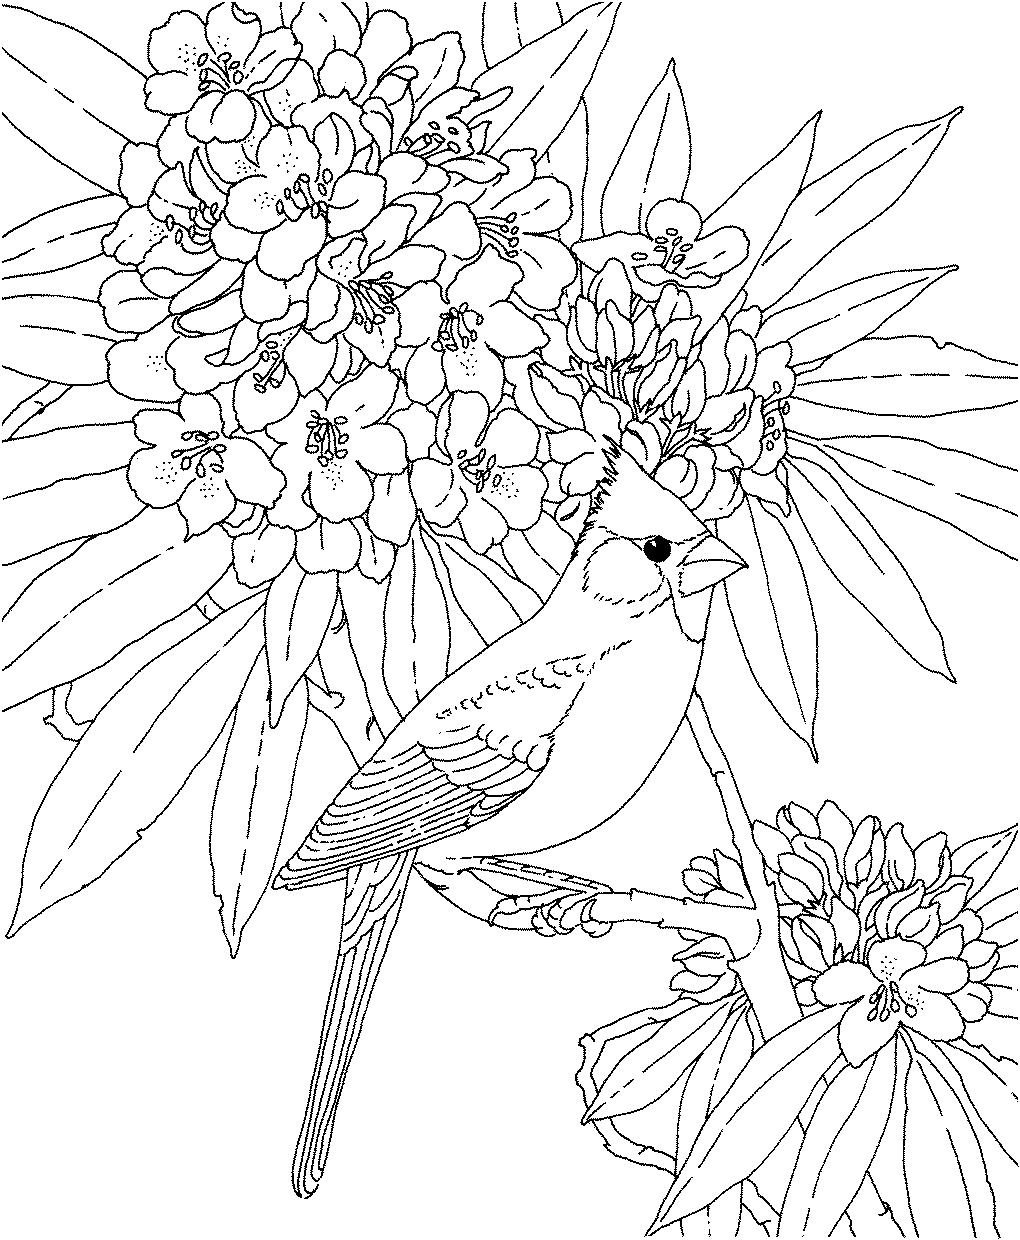 West Virginia Coloring Pages at GetColorings.com | Free printable